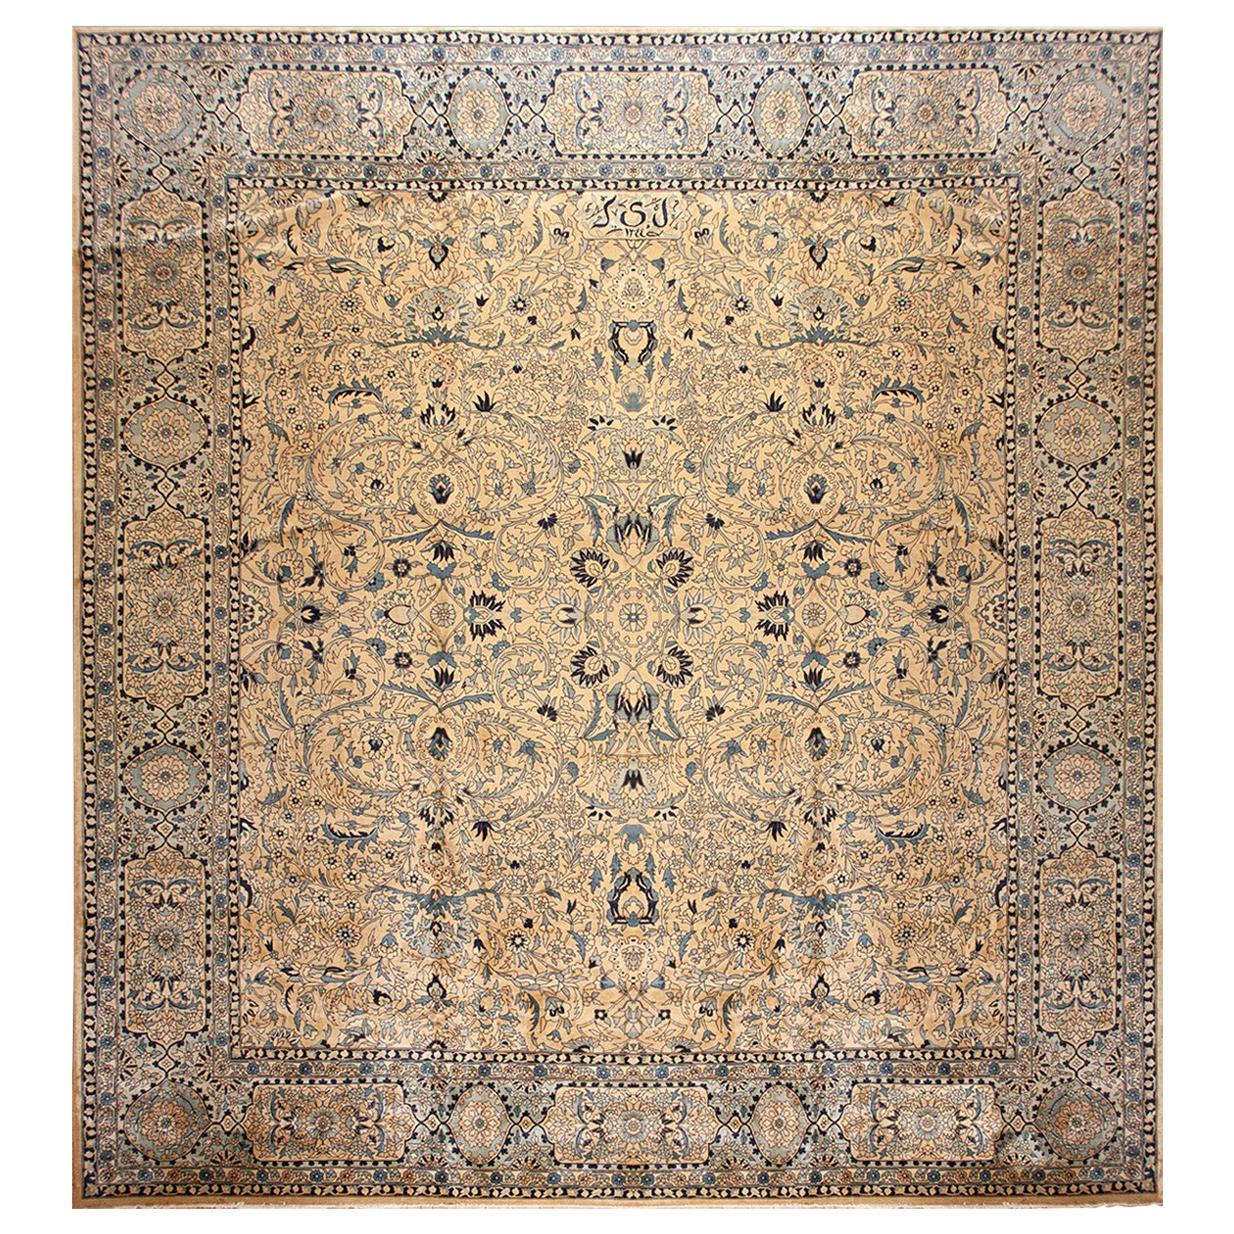 Early 20th Century N. Indian Lahore Carpet ( 16' x 17' - 487 x 518 )